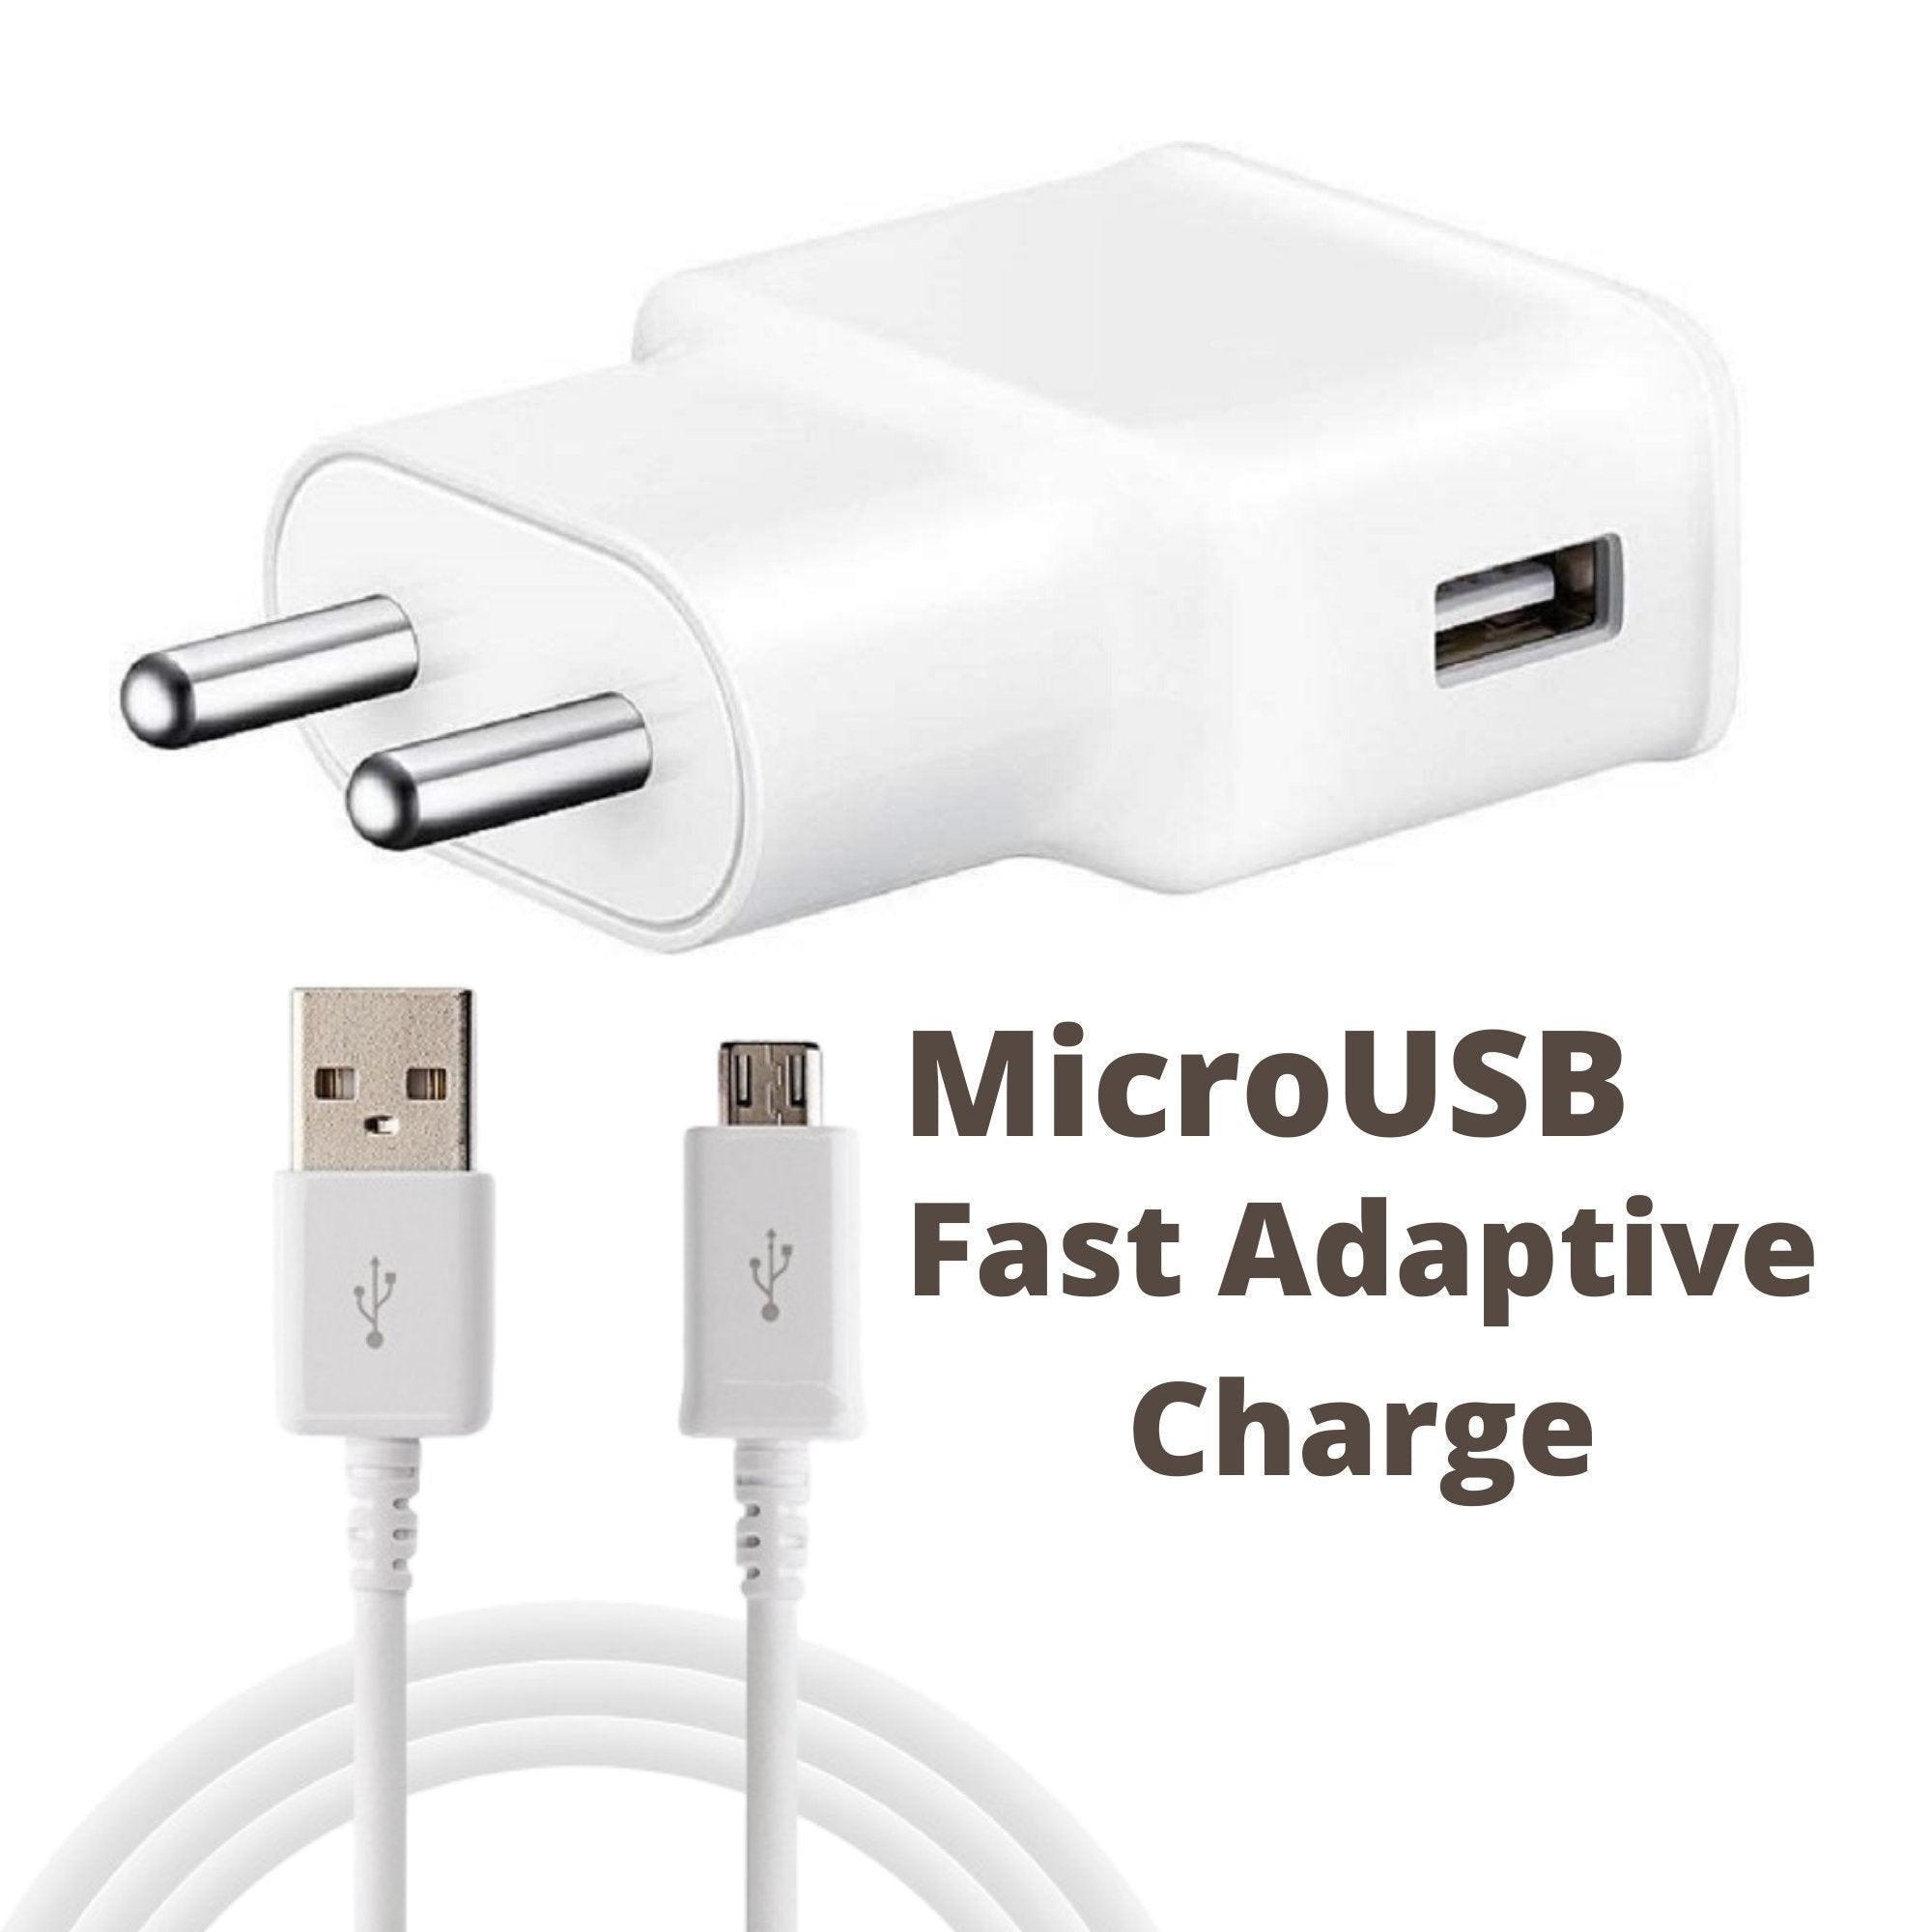 Samsung A10 Adaptive Mobile Charger 2 Amp With Adaptive Fast Cable White